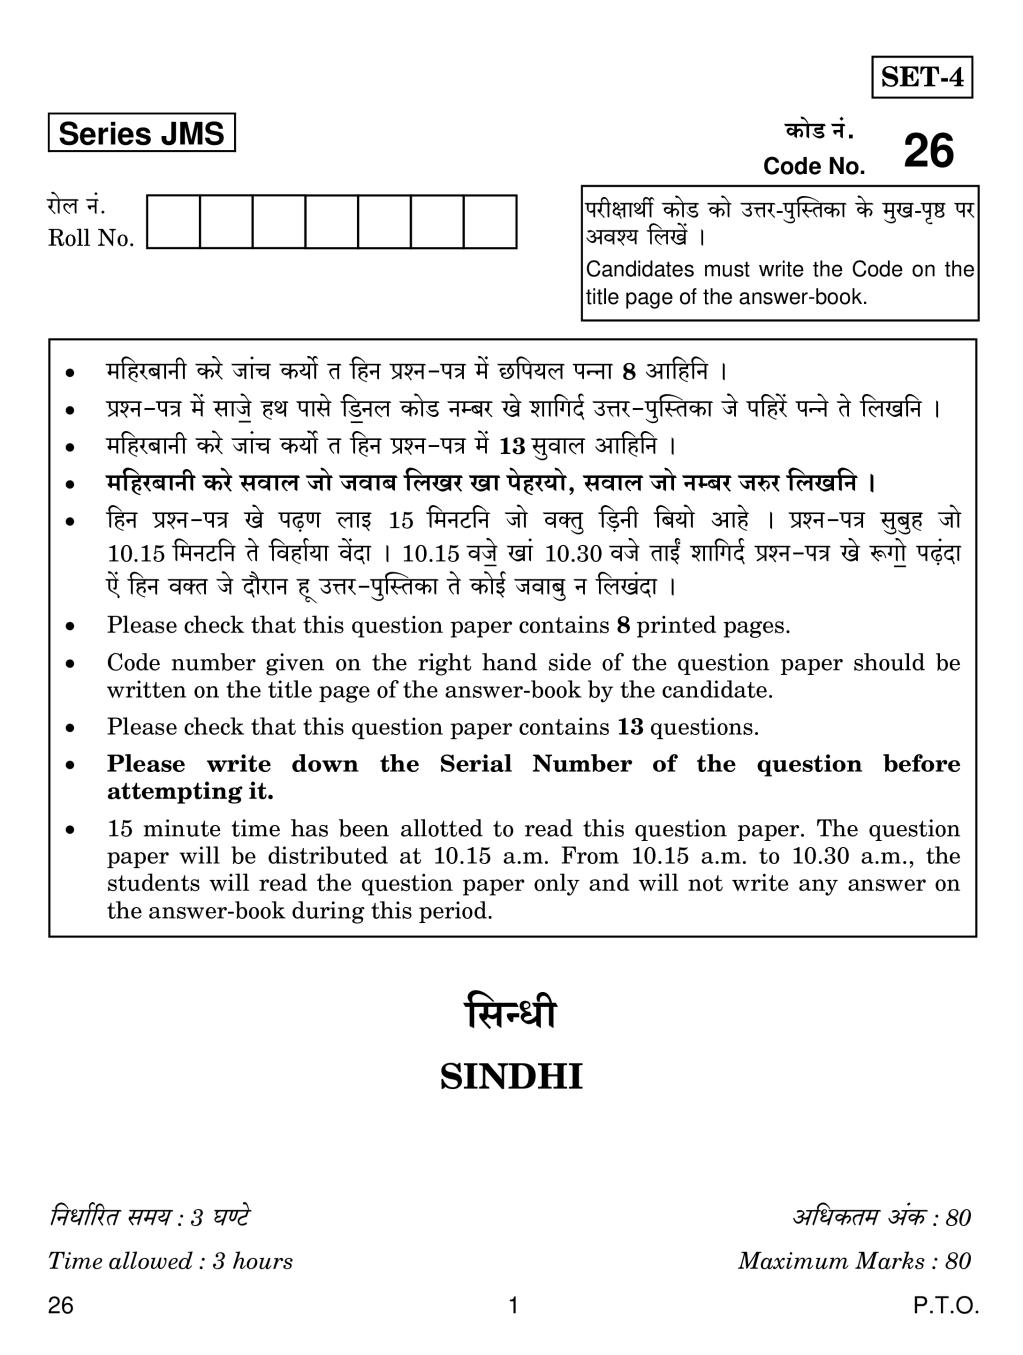 CBSE Class 10 Sindhi Question Paper 2019 - Page 1